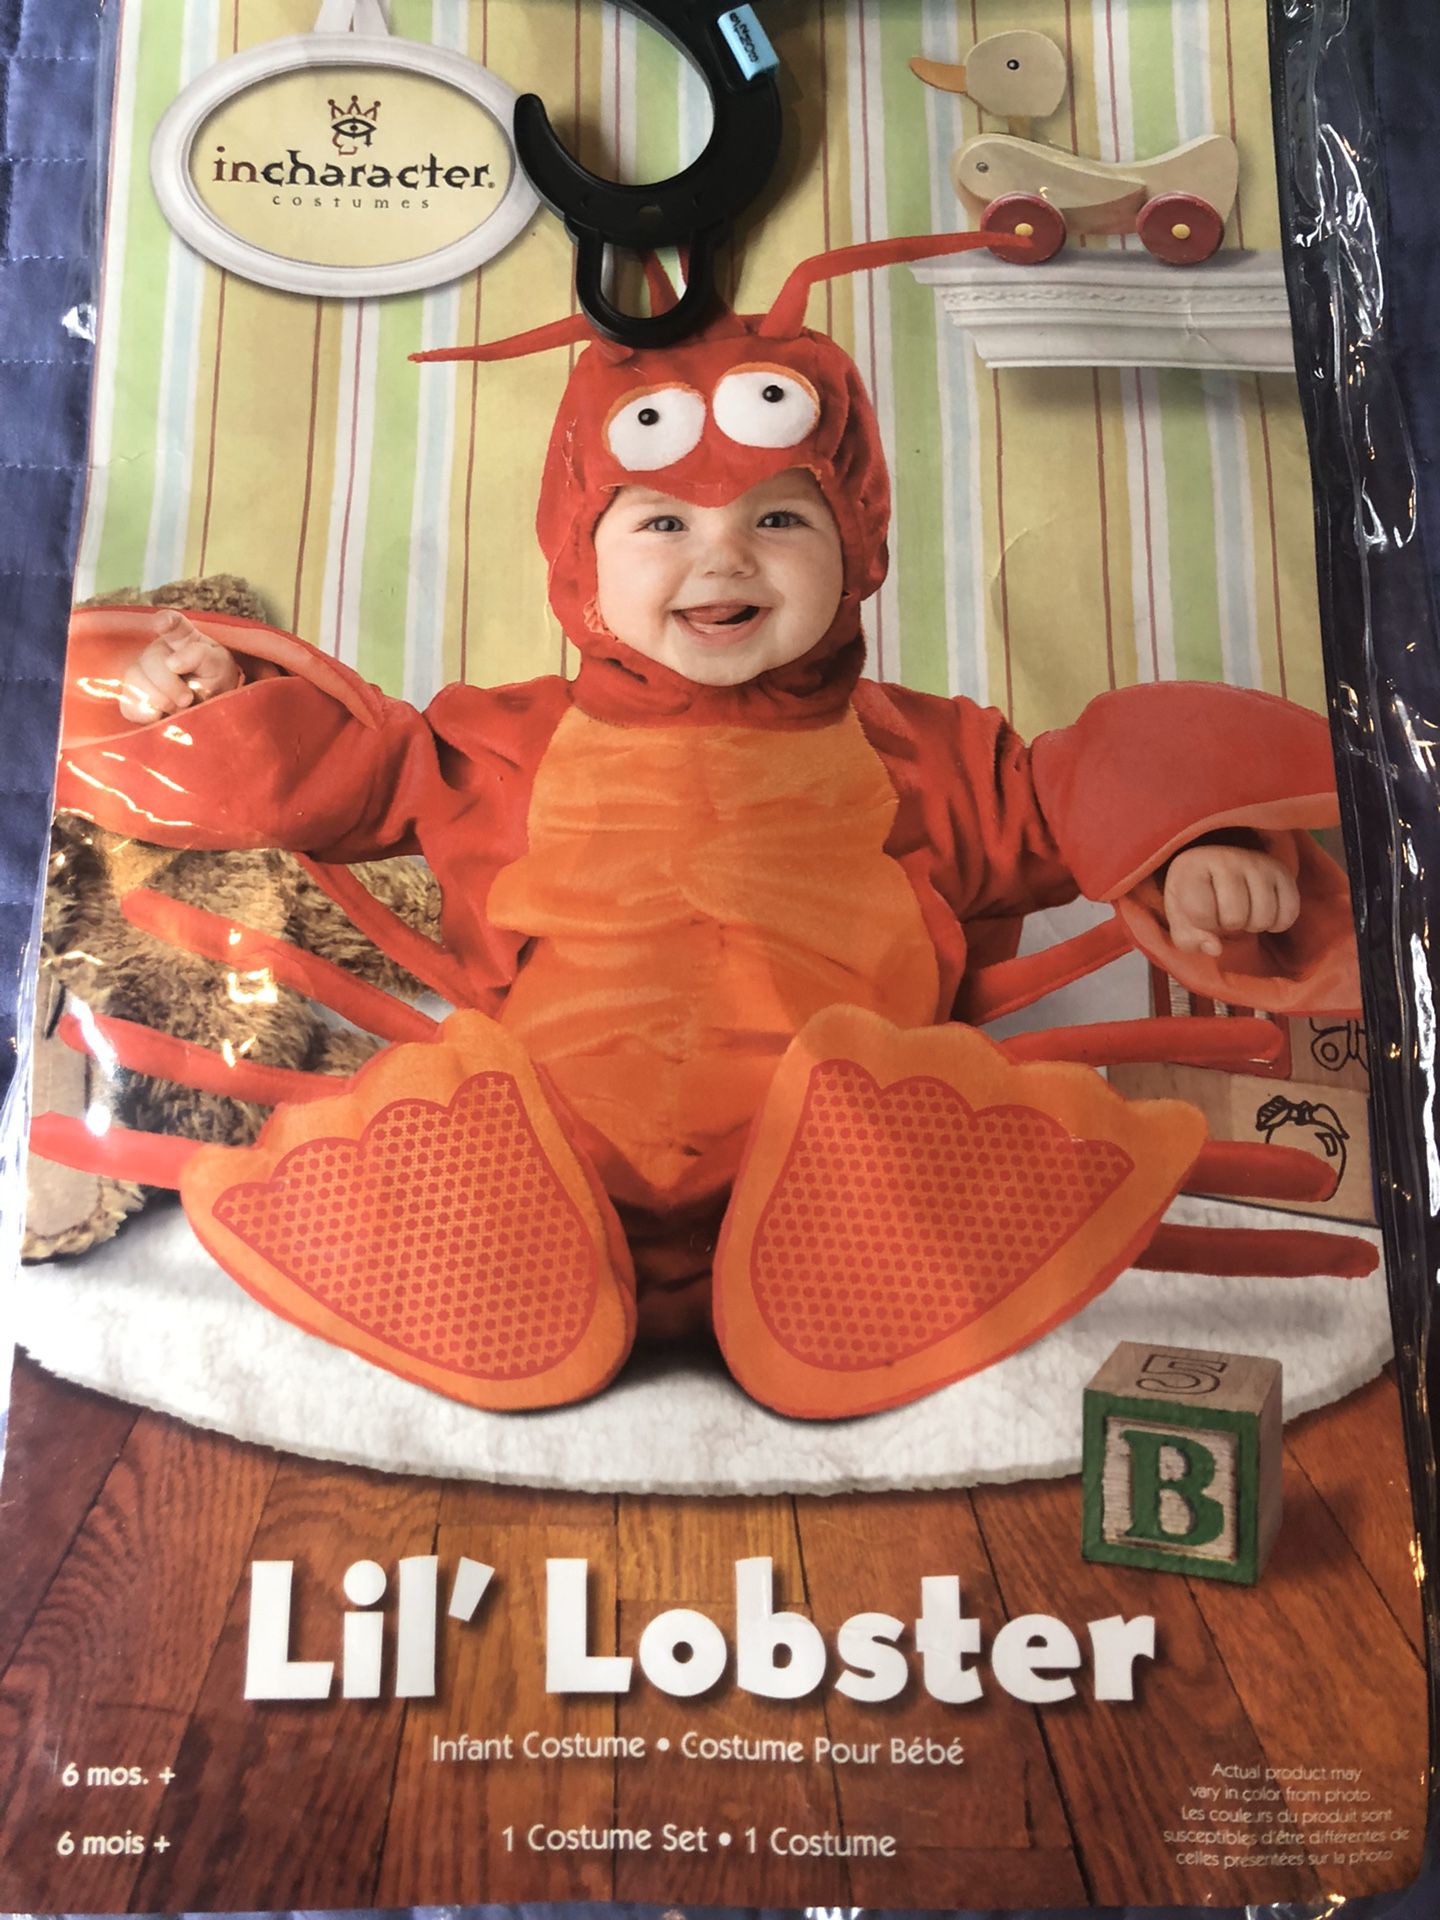 Lobster costume 6+ month